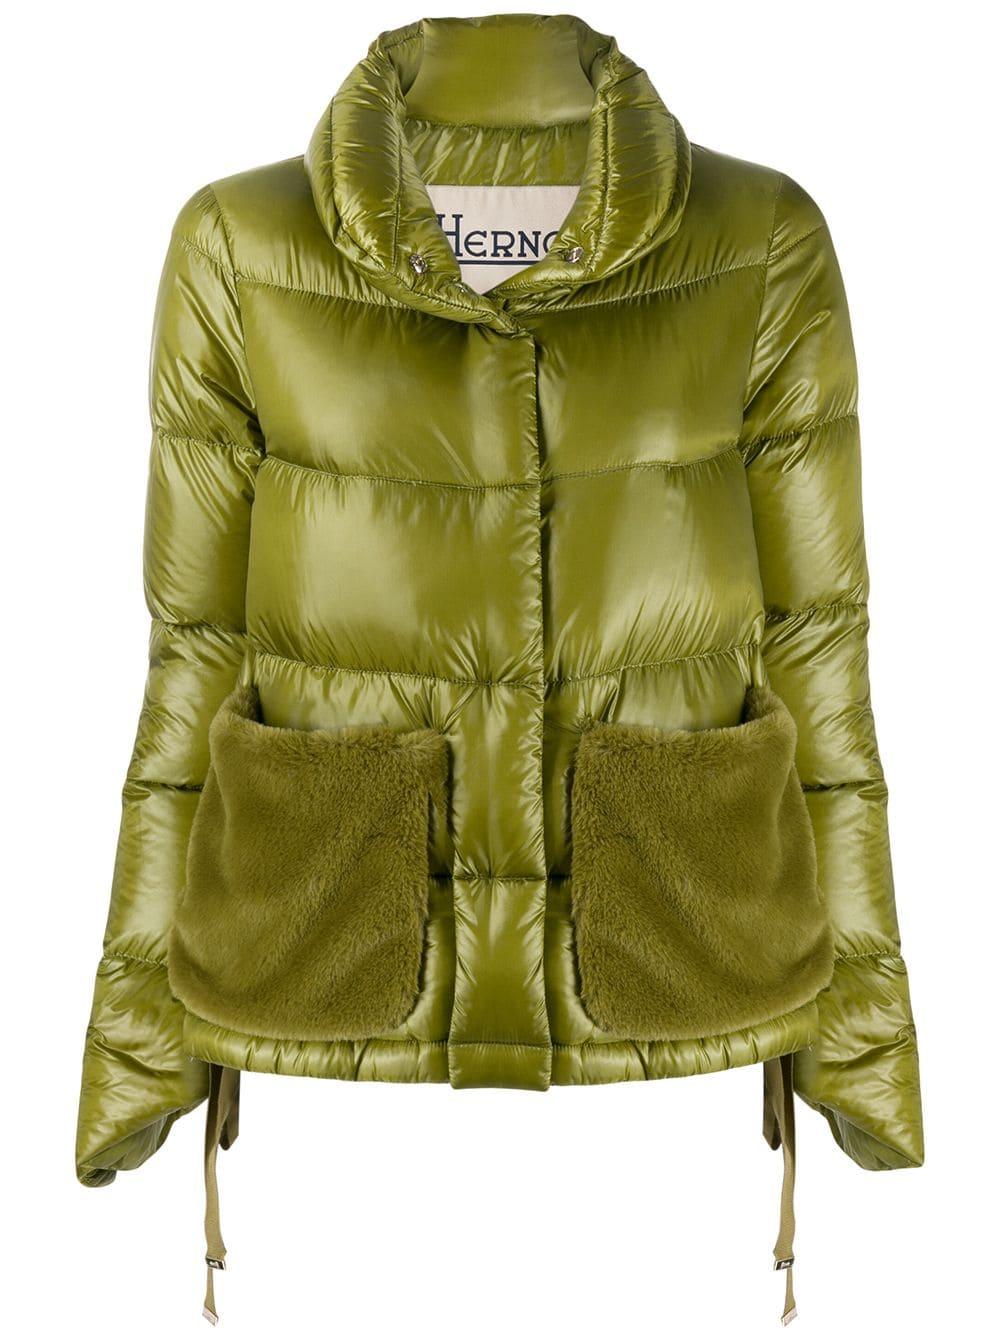 Herno Cotton Short Puffer Jacket in Green - Lyst